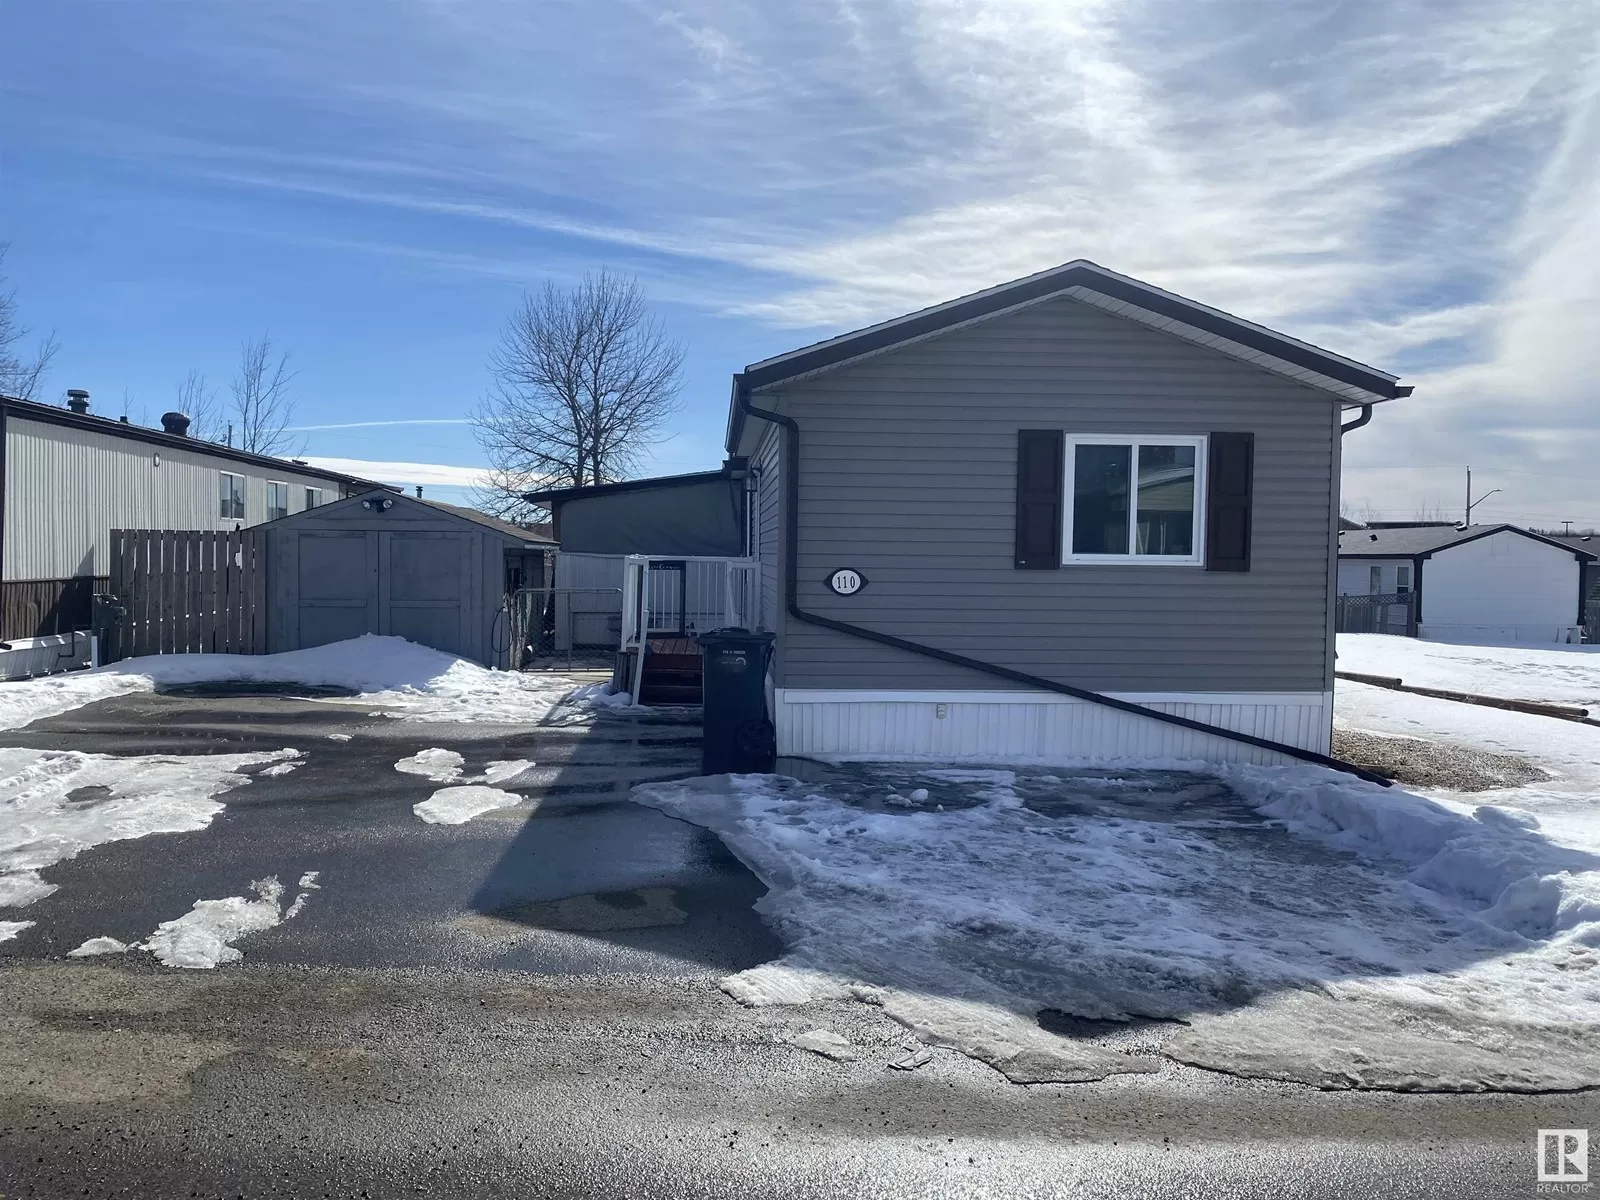 Mobile Home for rent: #110 2251 50 St, Drayton Valley, Alberta T7A 1W1